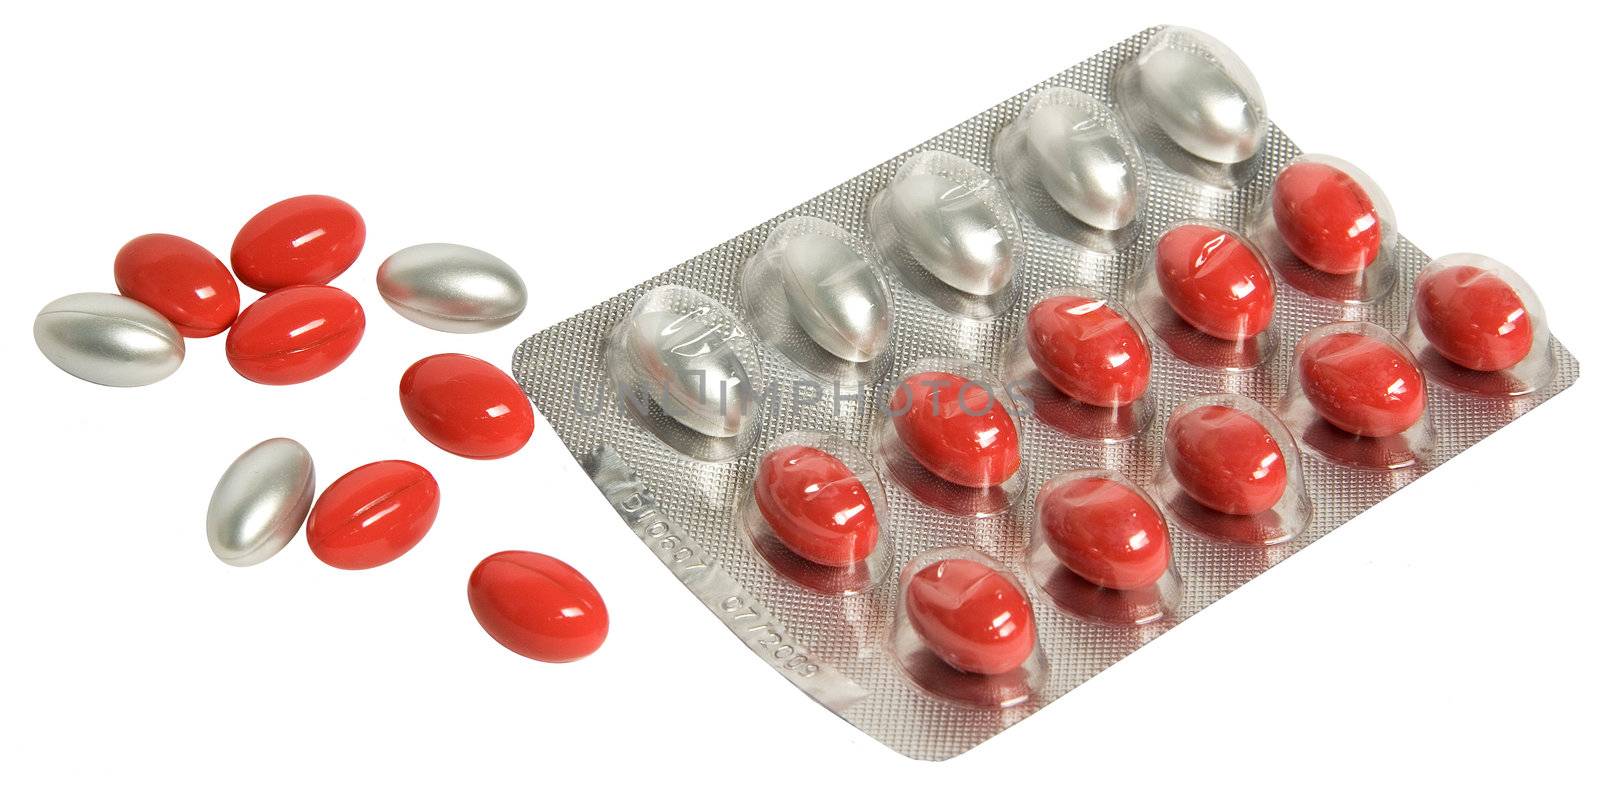 Red and silver capsules on a white background by nutly